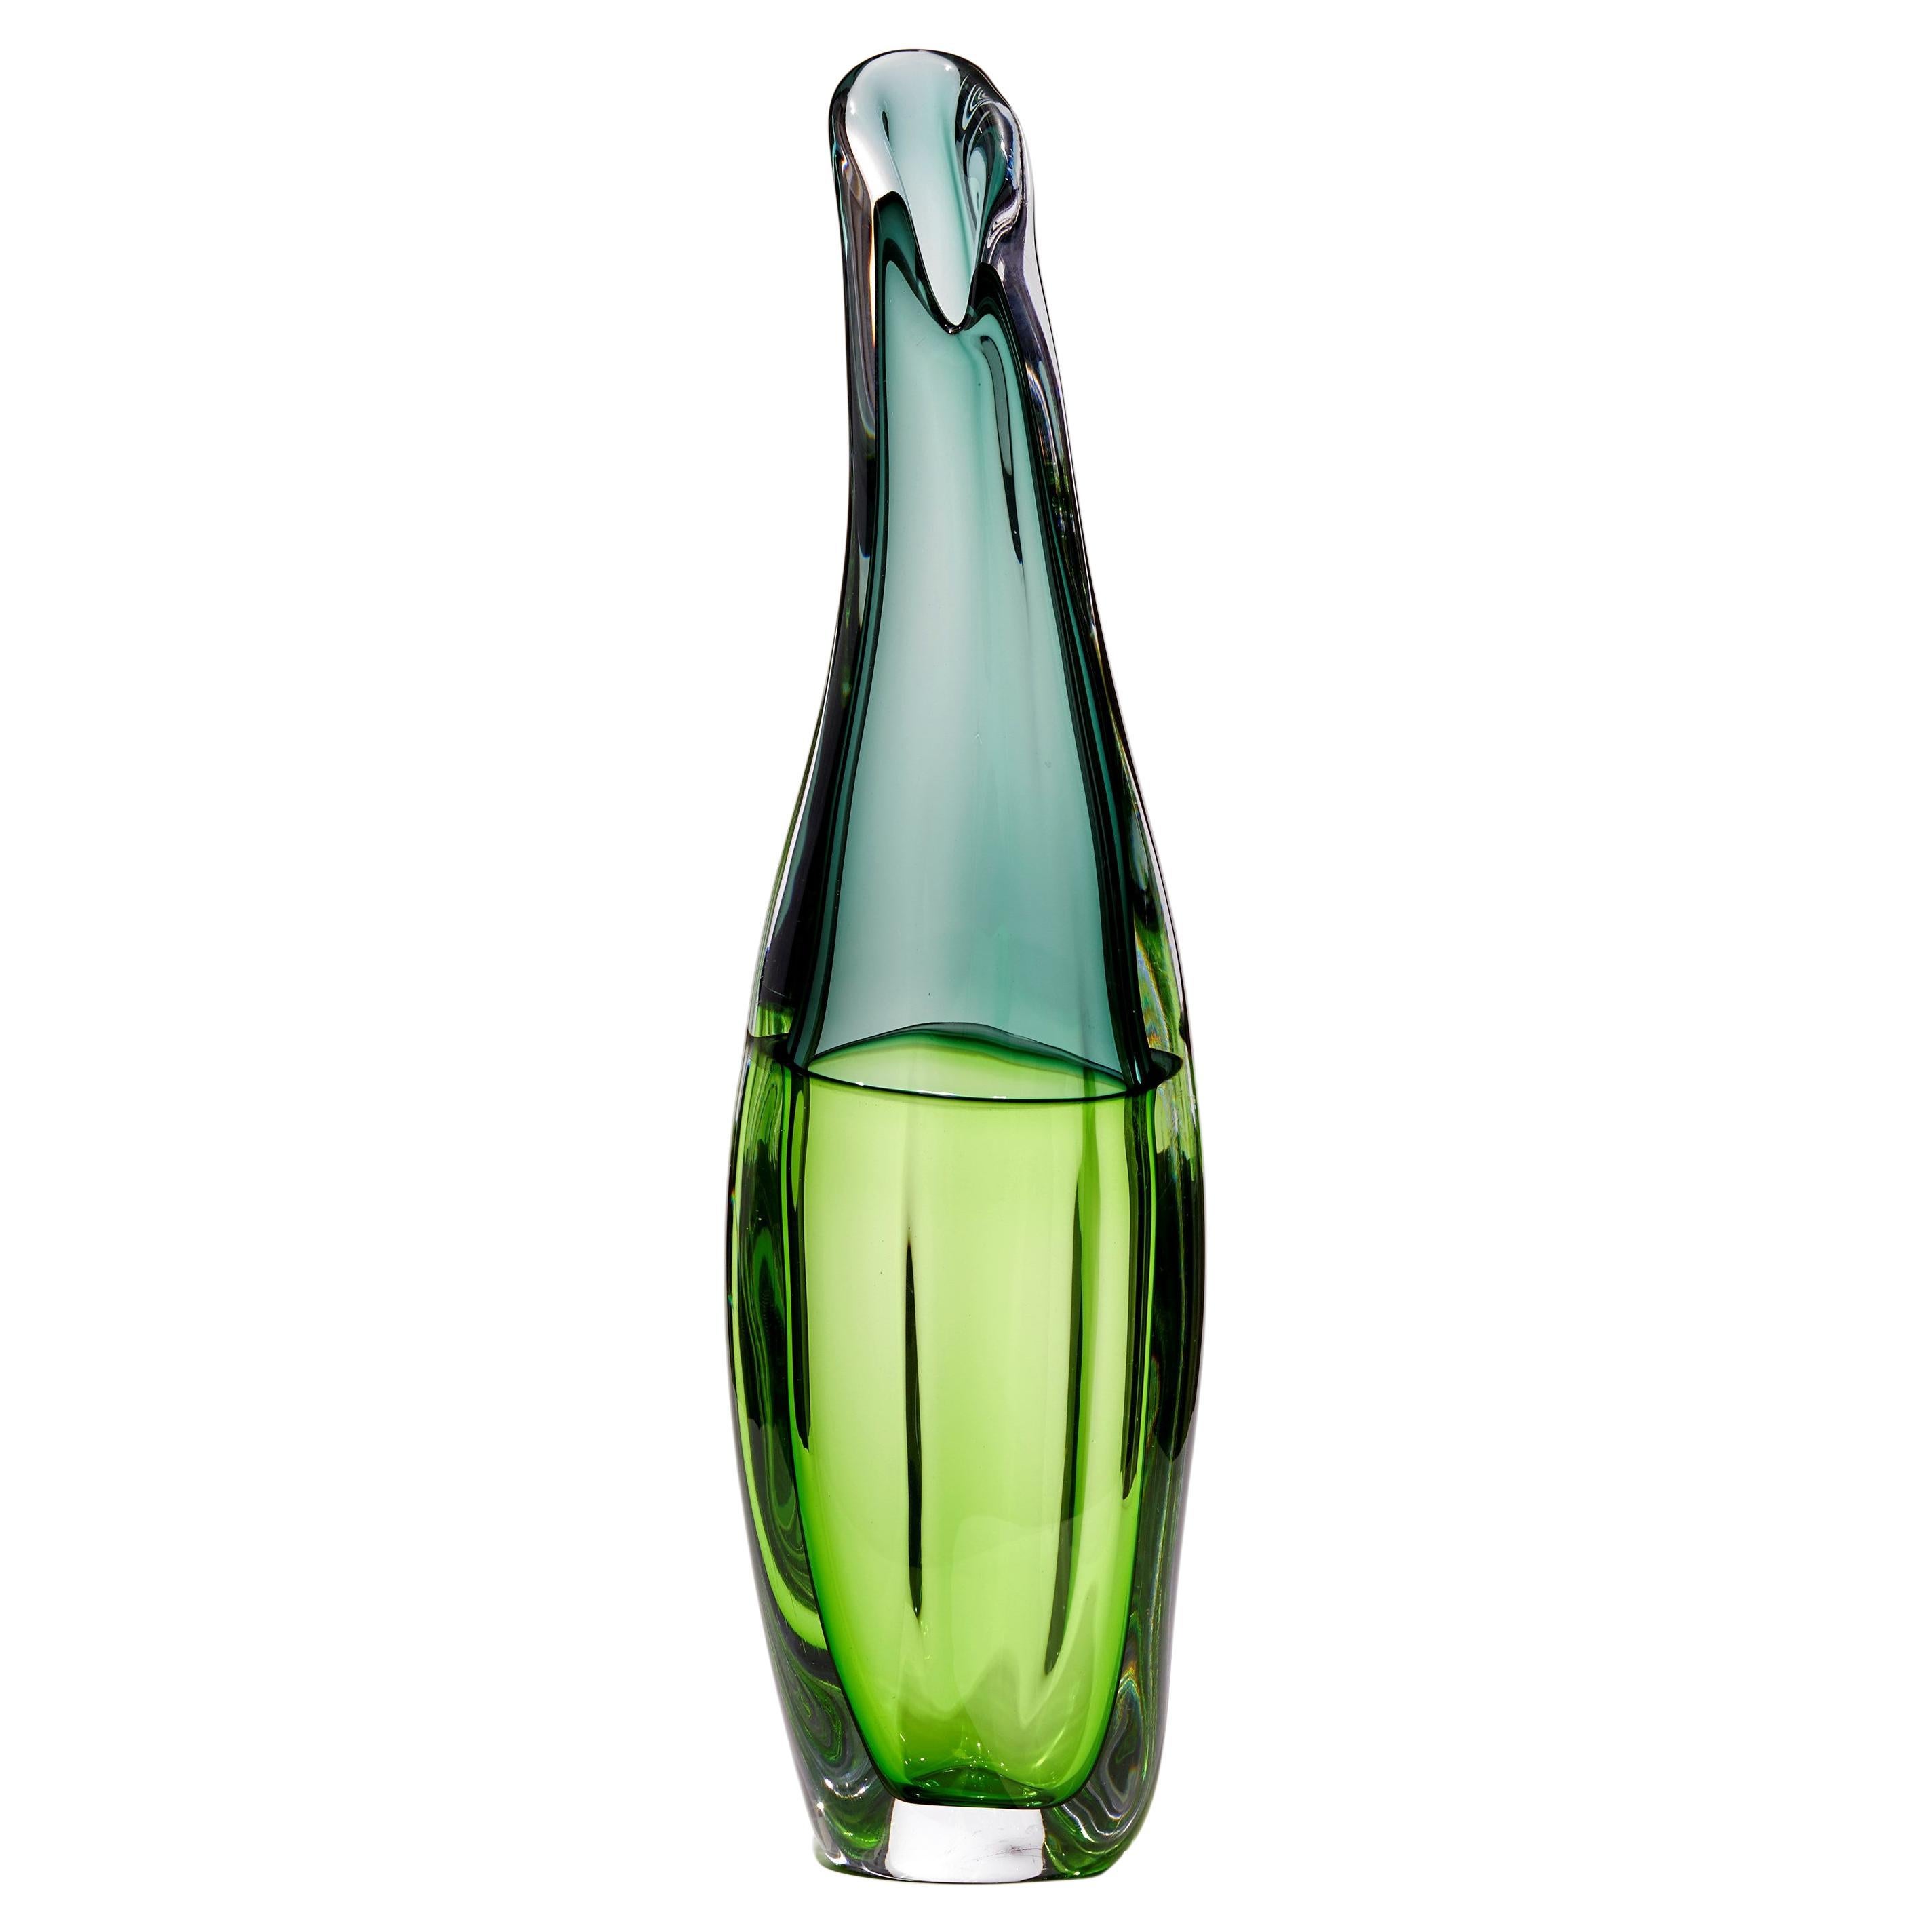 Sommercalmo 132, a Sculptural Glass Vase in Two-tone Green by Vic Bamforth